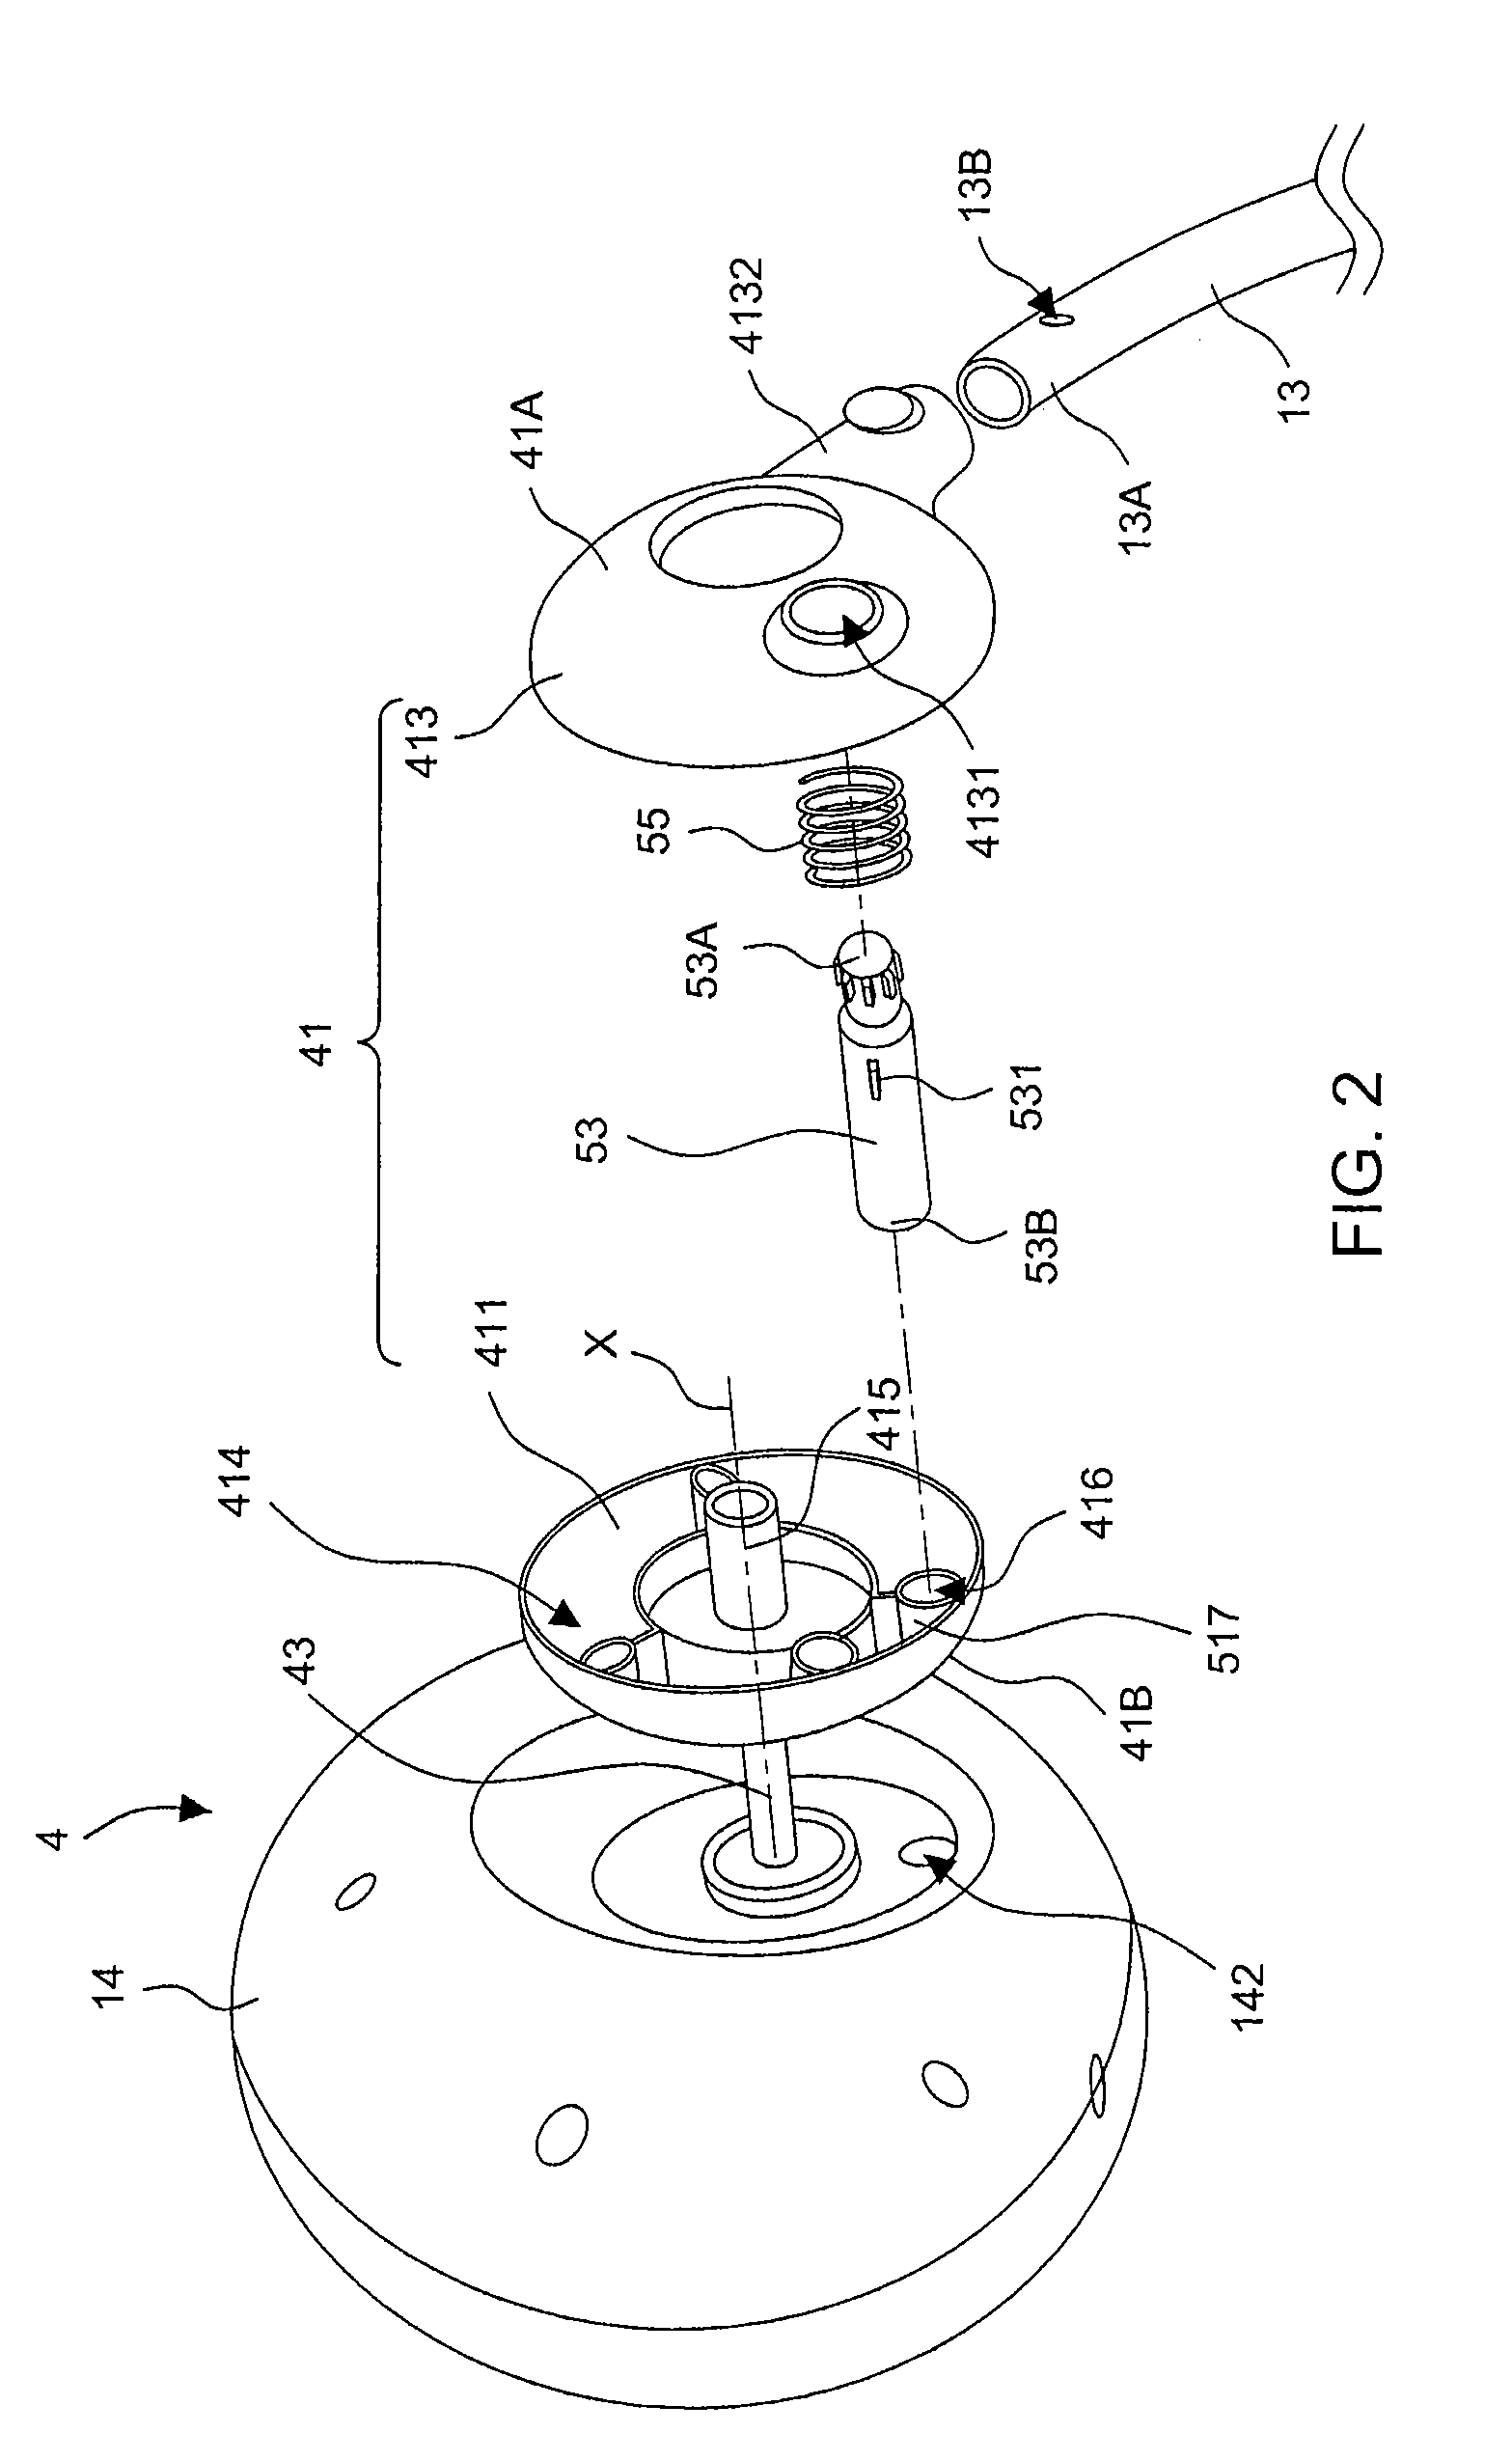 Infant Swing Apparatus and Method of Operating the Same